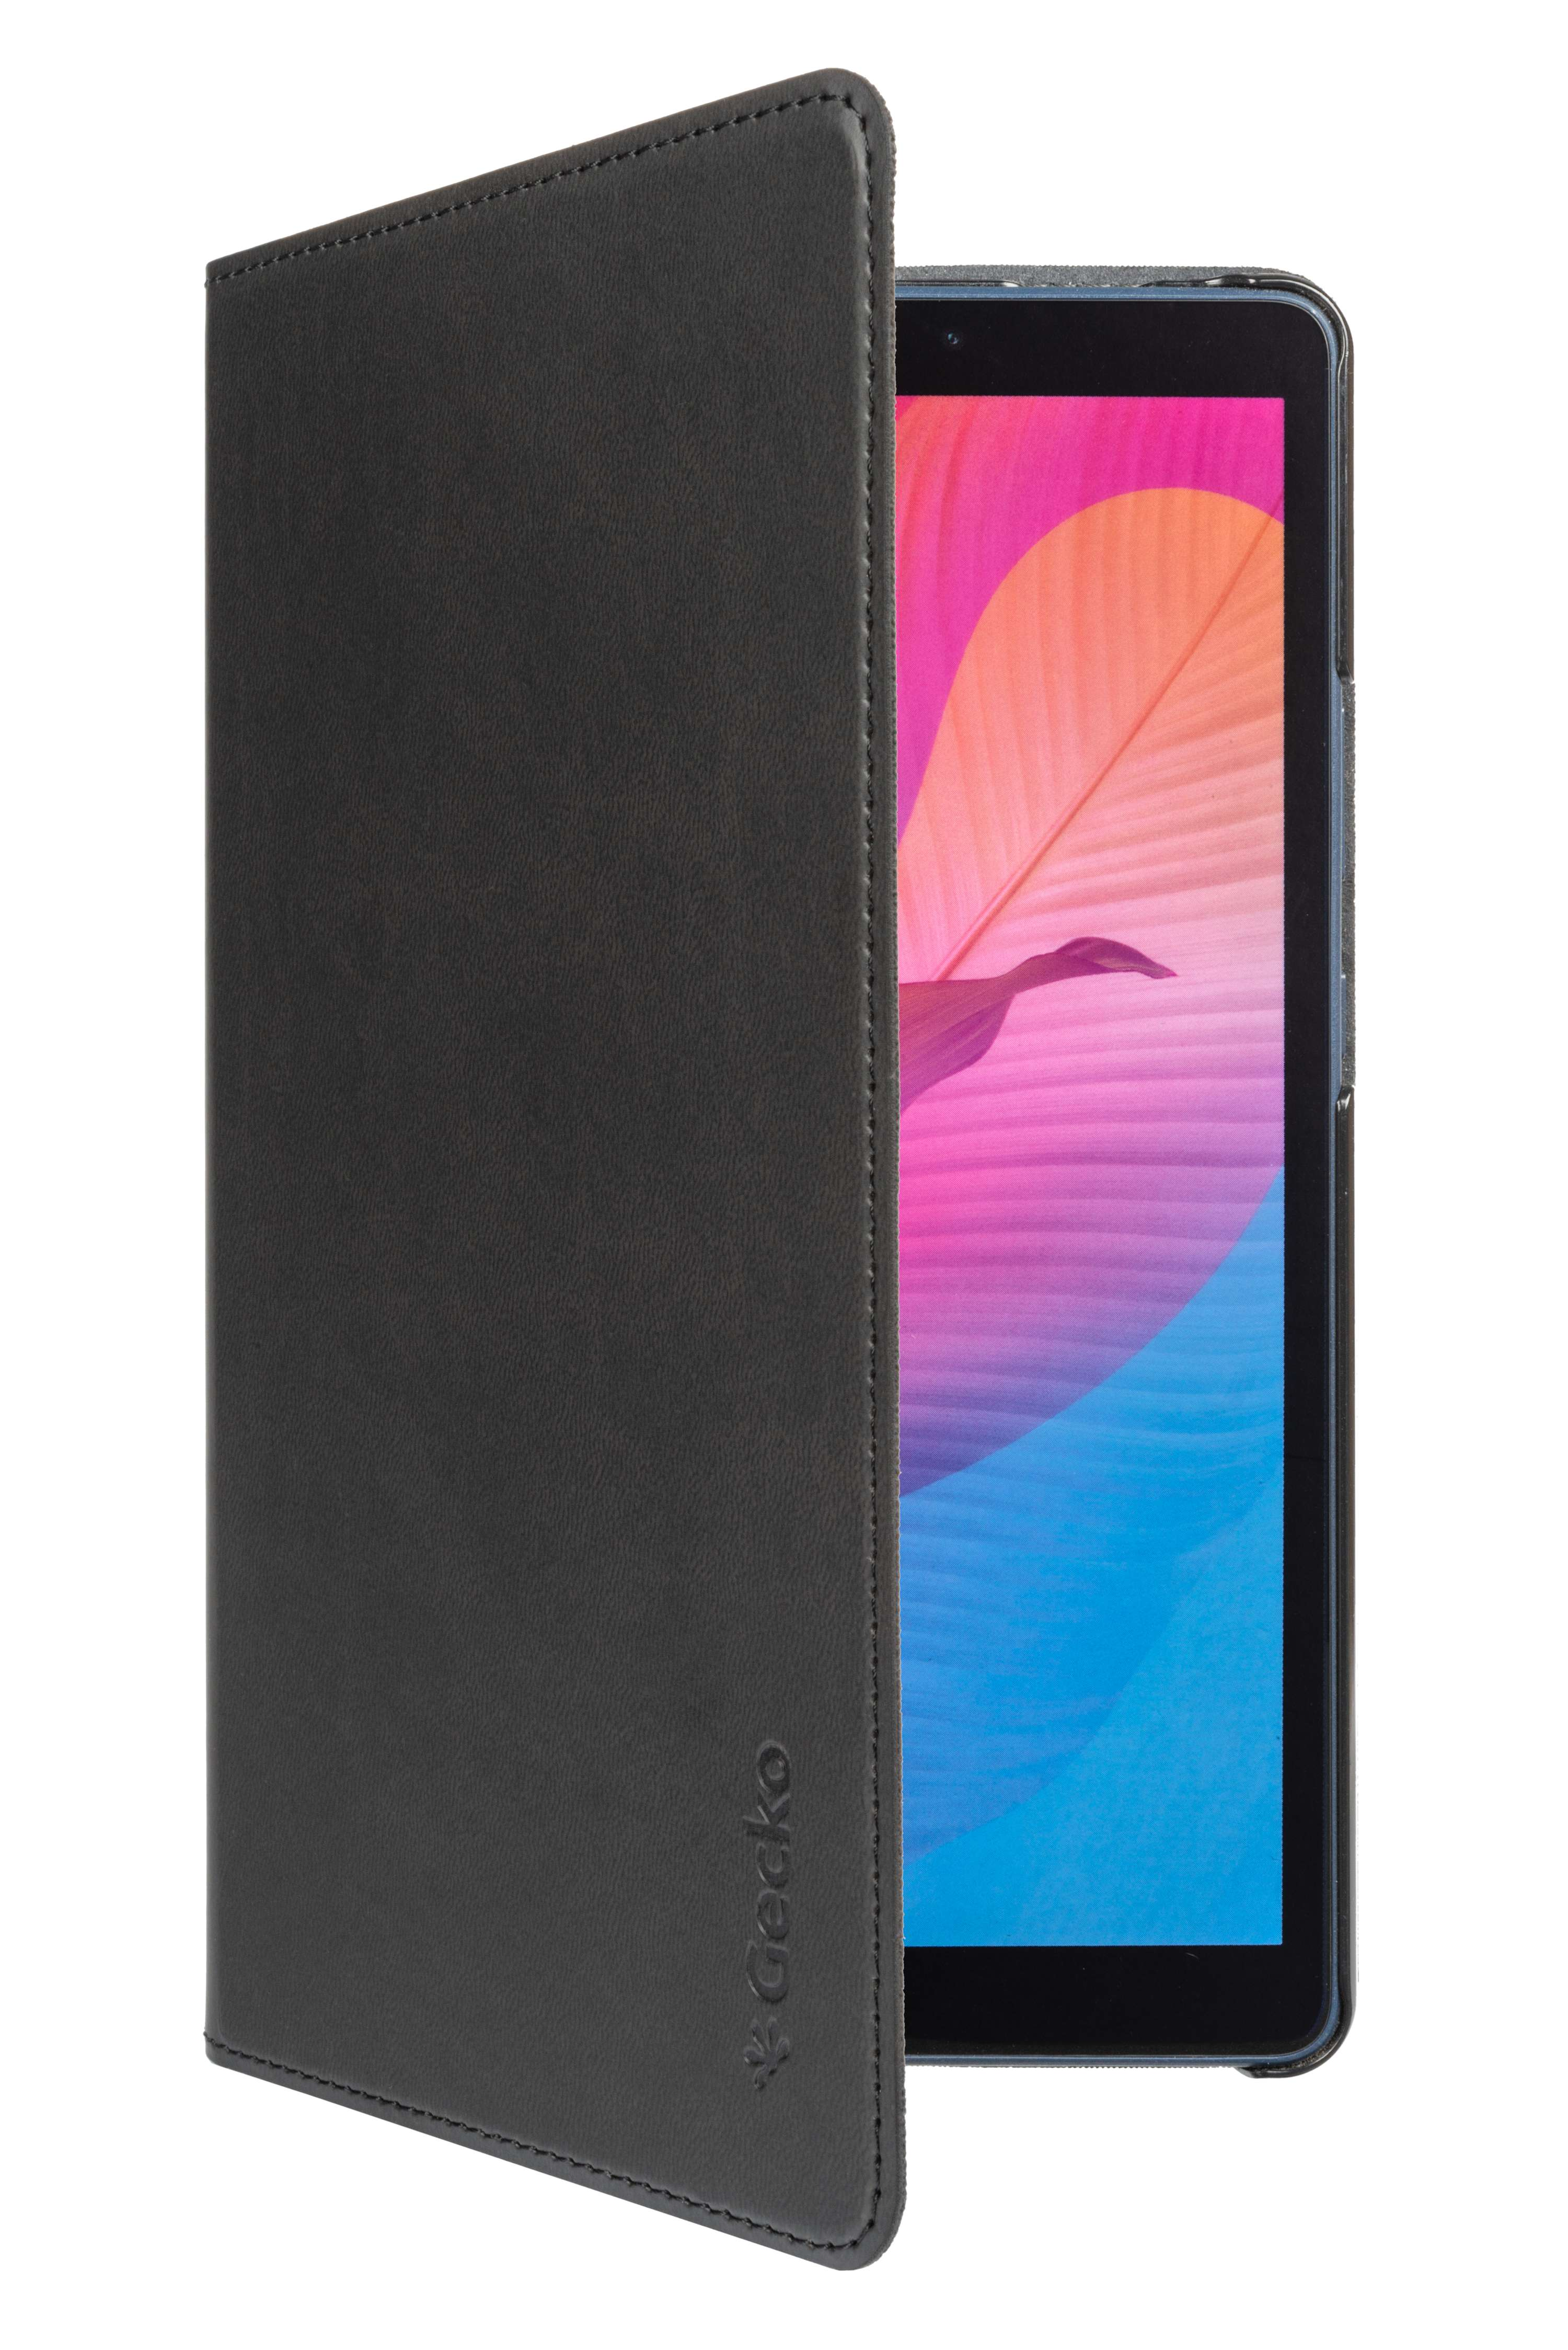 GECKO COVERS Easy-Click Cover 2.0 Tablet Hülle Bookcover Schwarz PU für Leather, Huawei